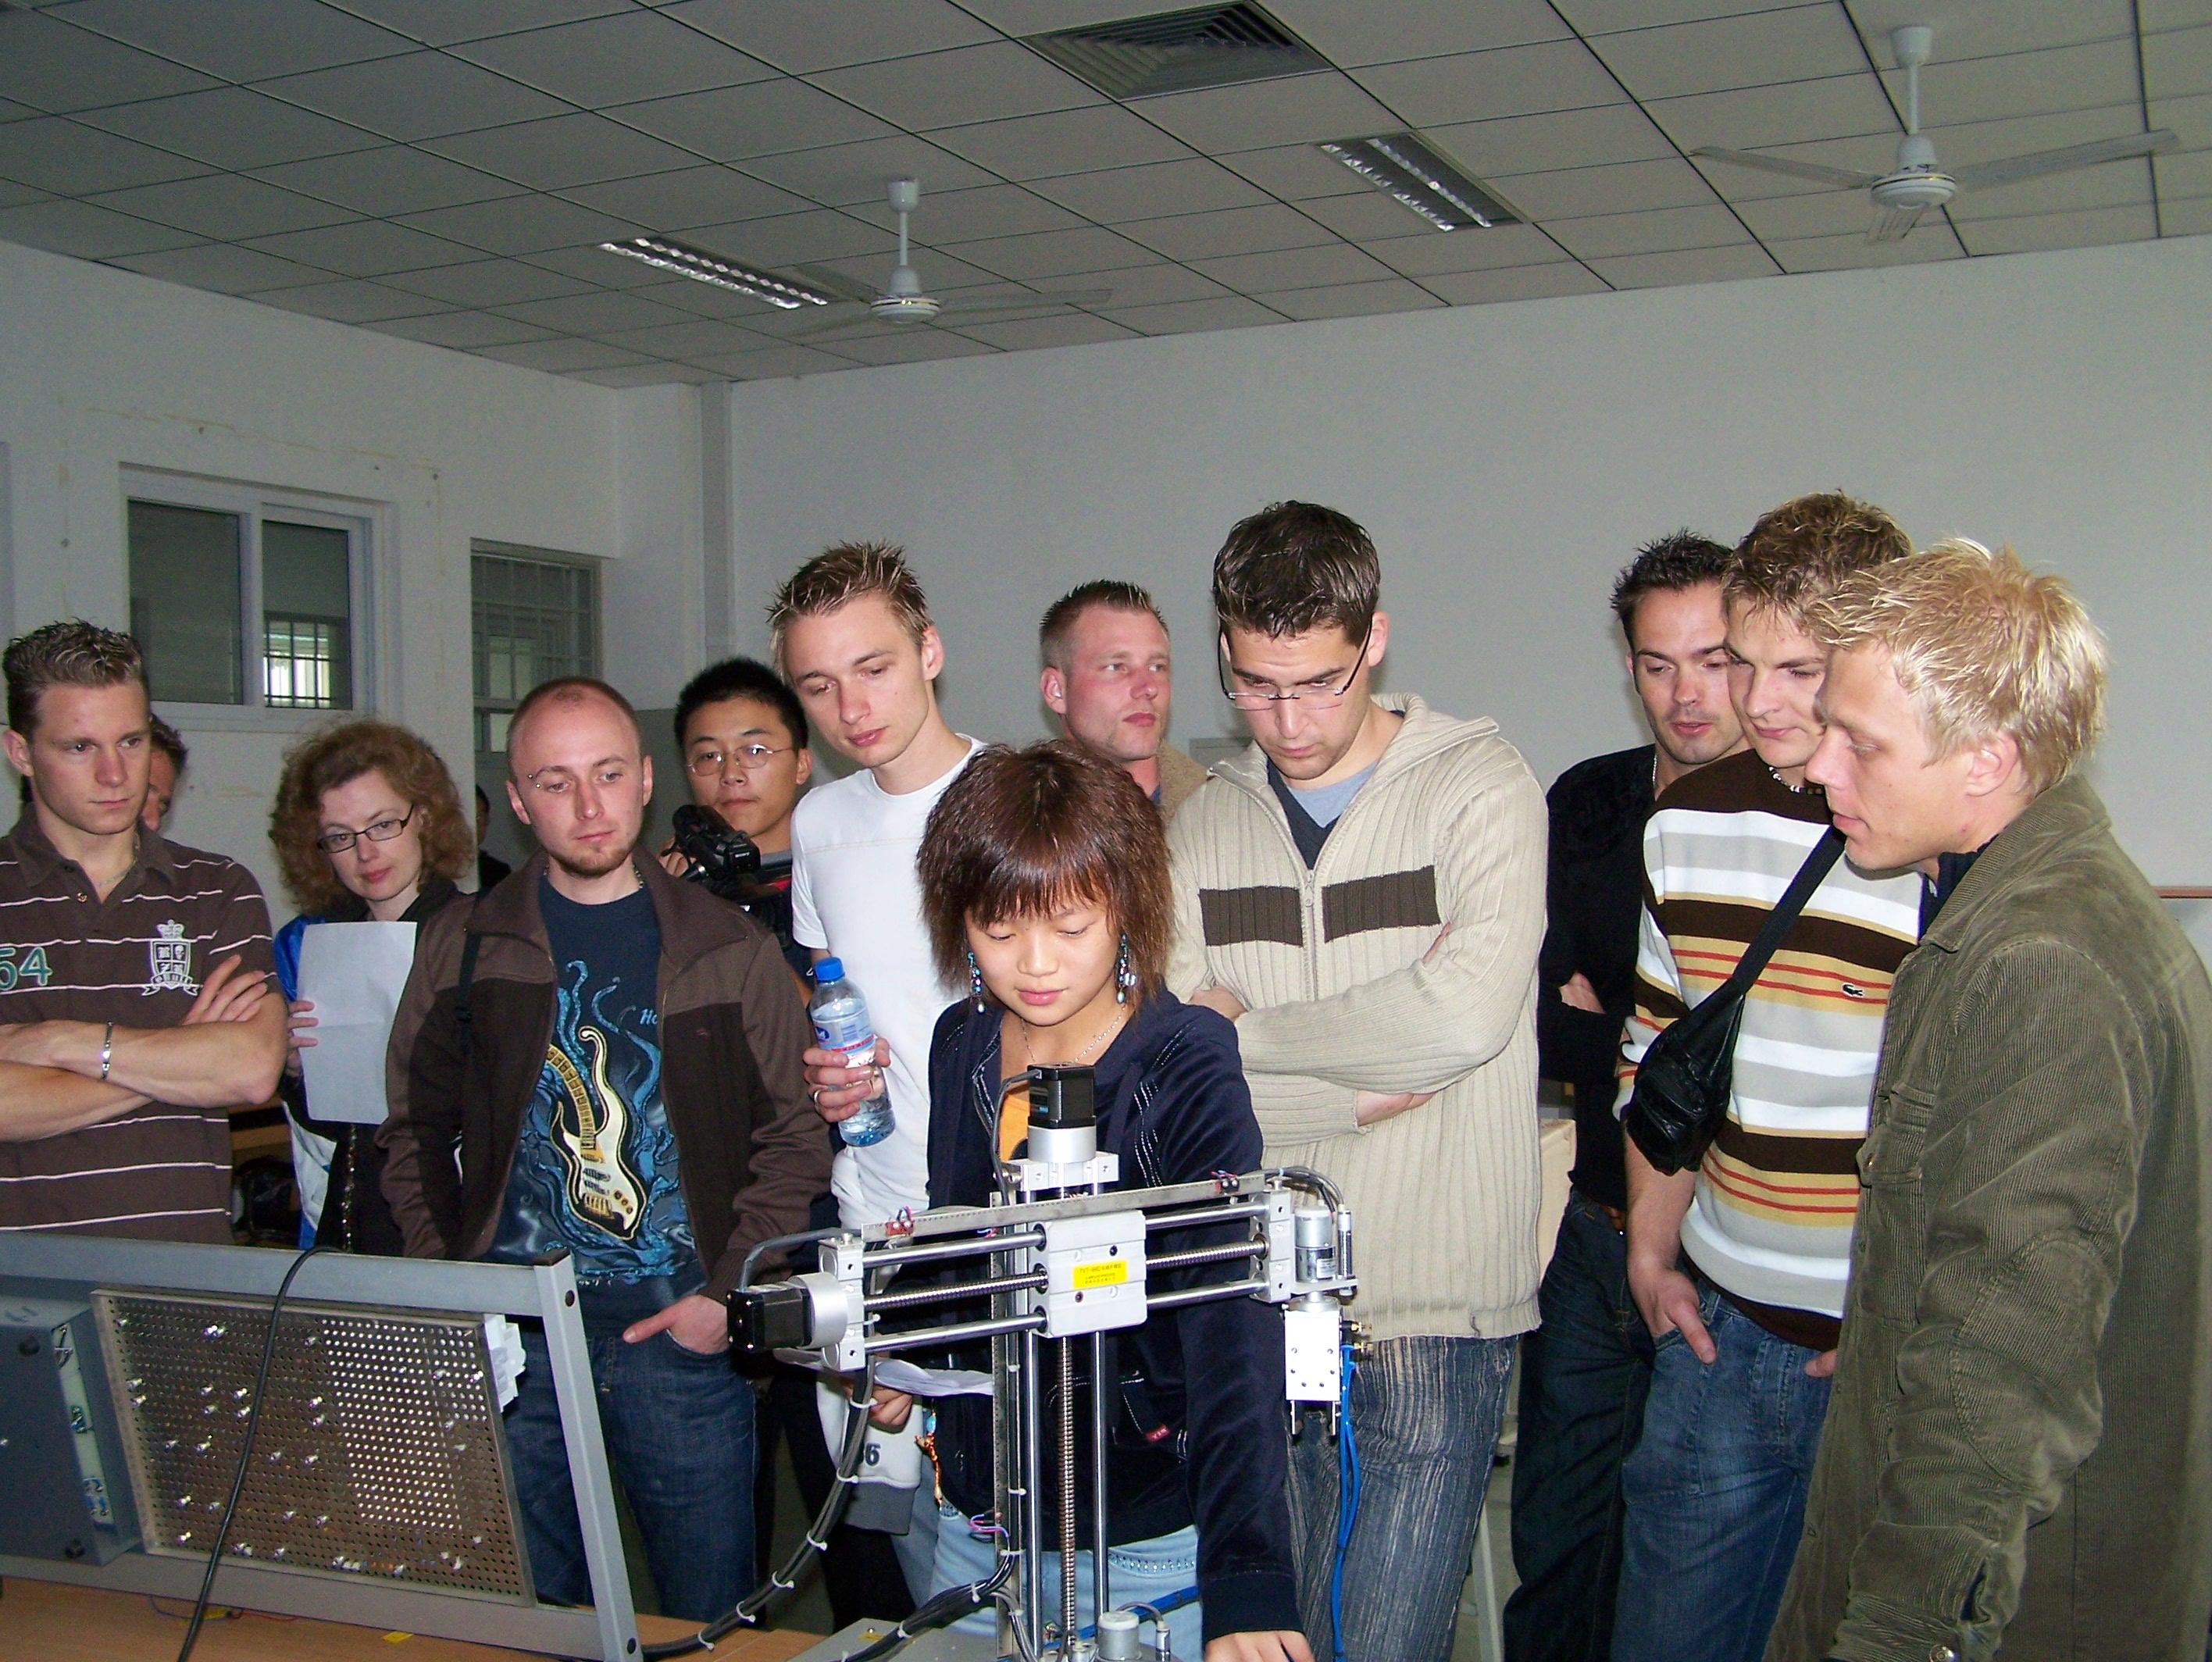 The  Student's  Delegation  from  Bochum  University  of  Applied  Sciences  of  Germany  paid  a  4-day  visit  to